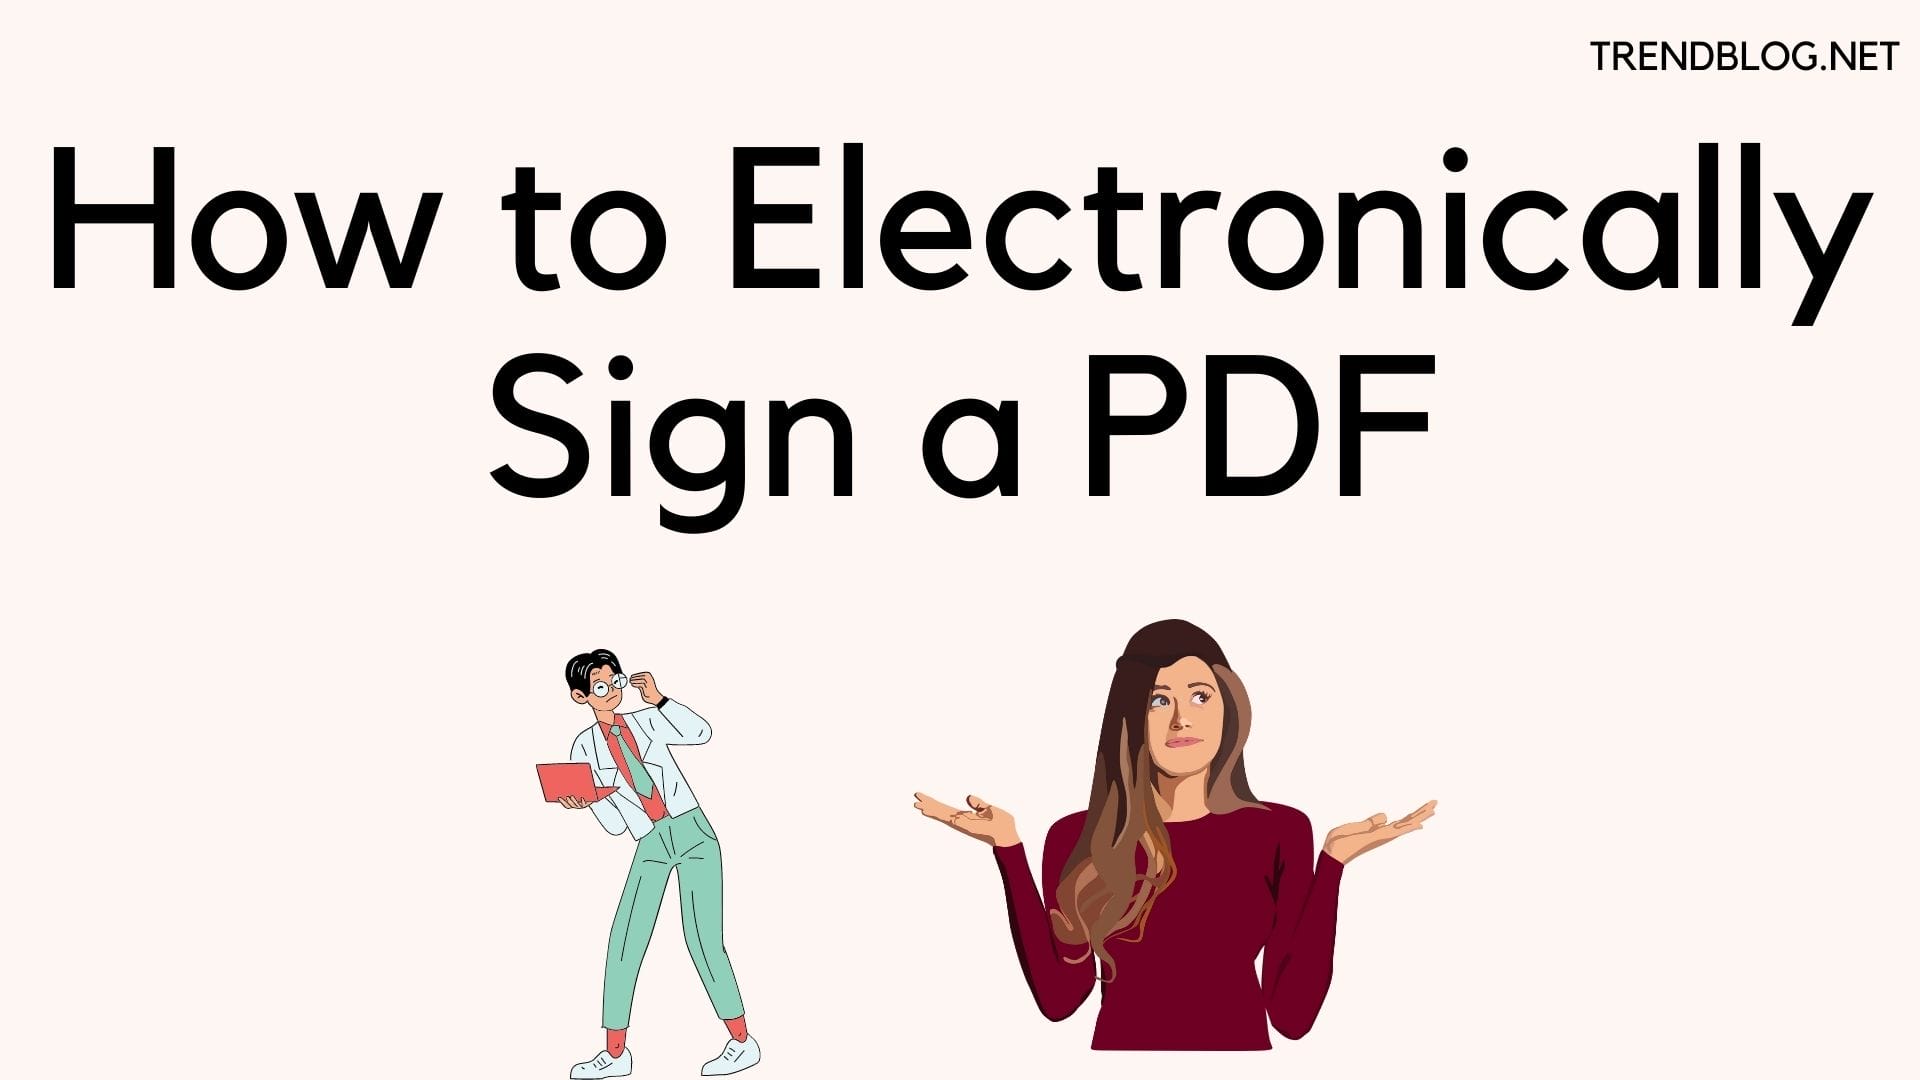  Do You Also Want to Know How to Electronically Sign a PDF